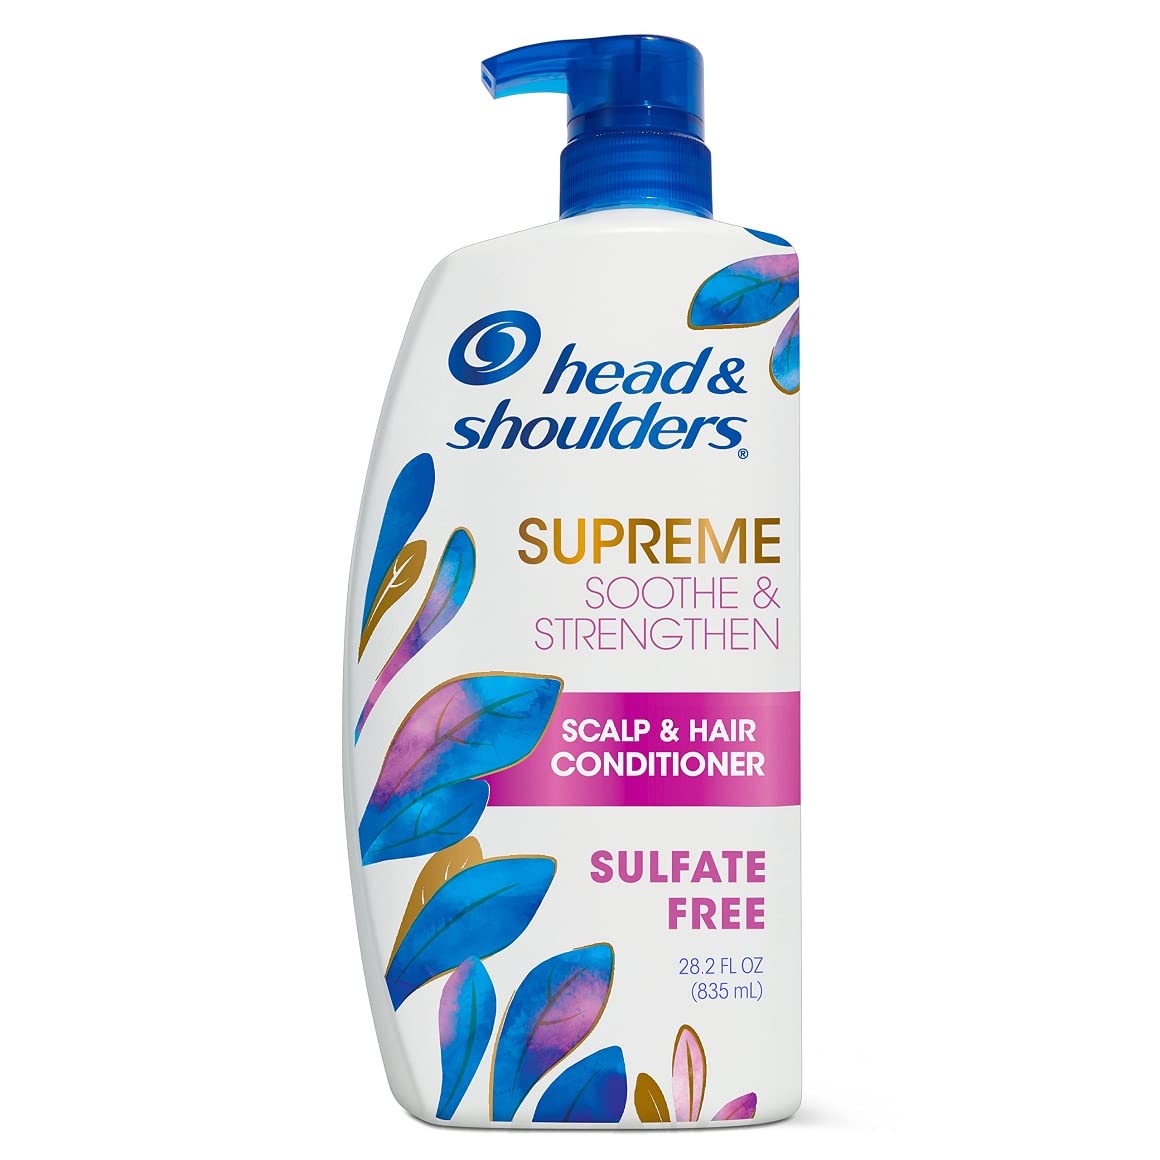 Head & Shoulders Supreme Sulfate Free Conditioner with Argan Oil, Anti-Dandruff Treatment, Soothe & Strengthen Hair & Scalp, 28.2 Fl Oz